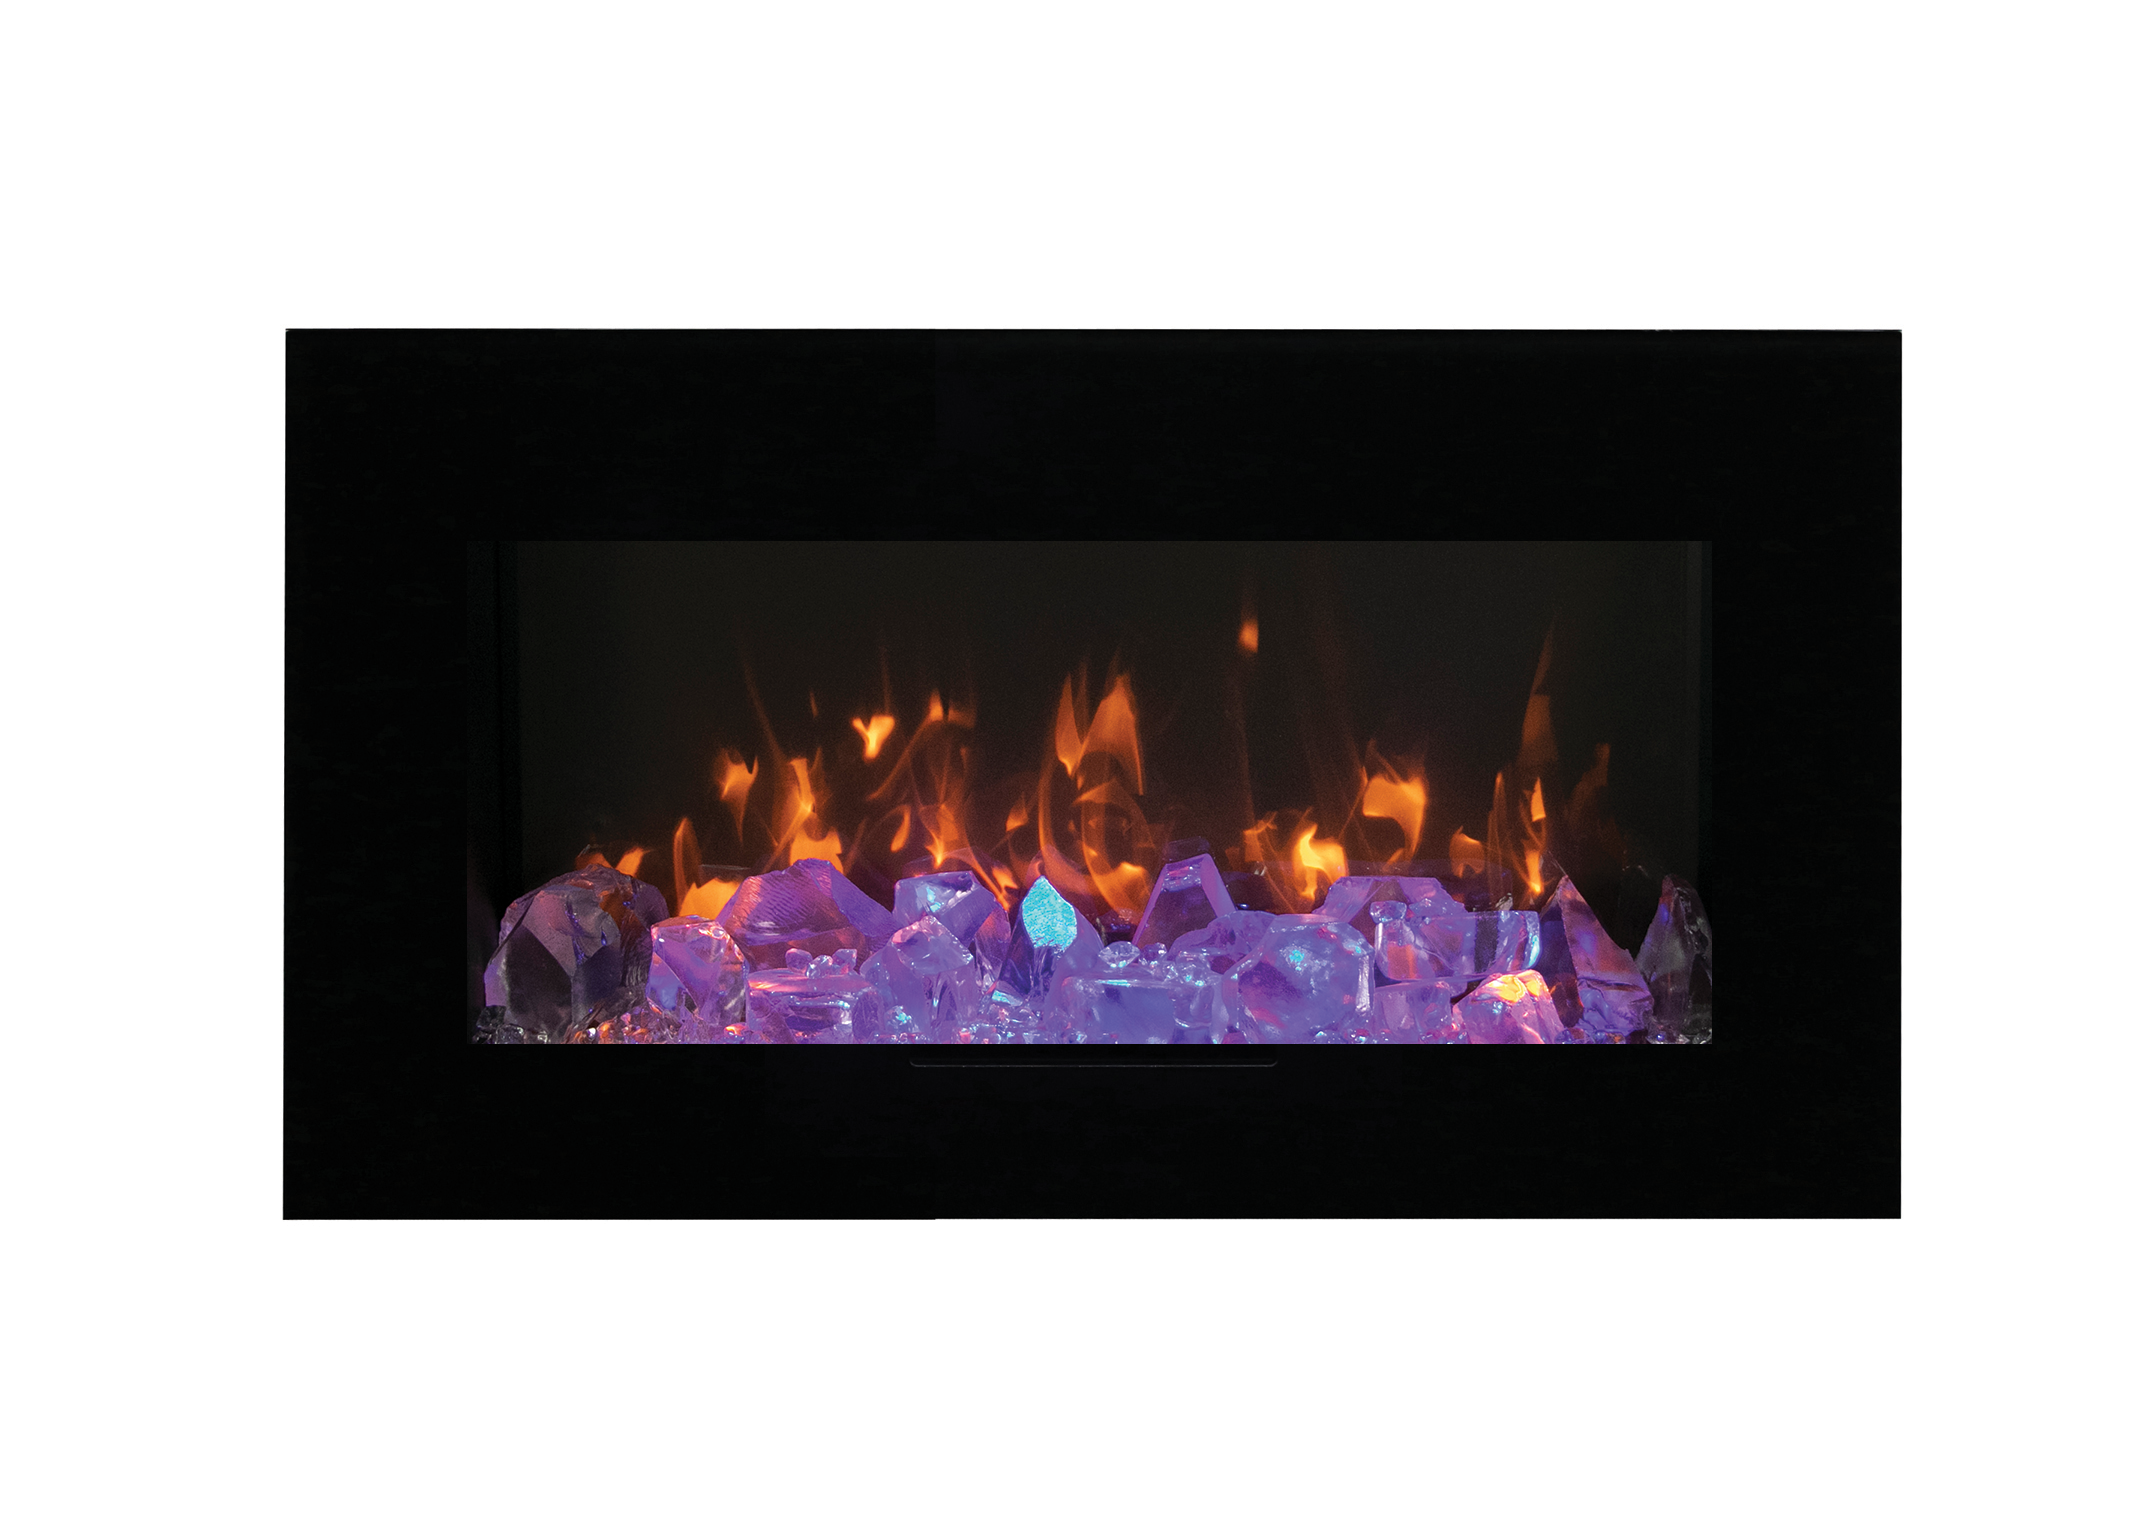 Amantii 34" Wall Mount/Flush Mount Electric Fireplace with Glass Surround -WM-FM-34-4423-BG- Front View With Violet Flame